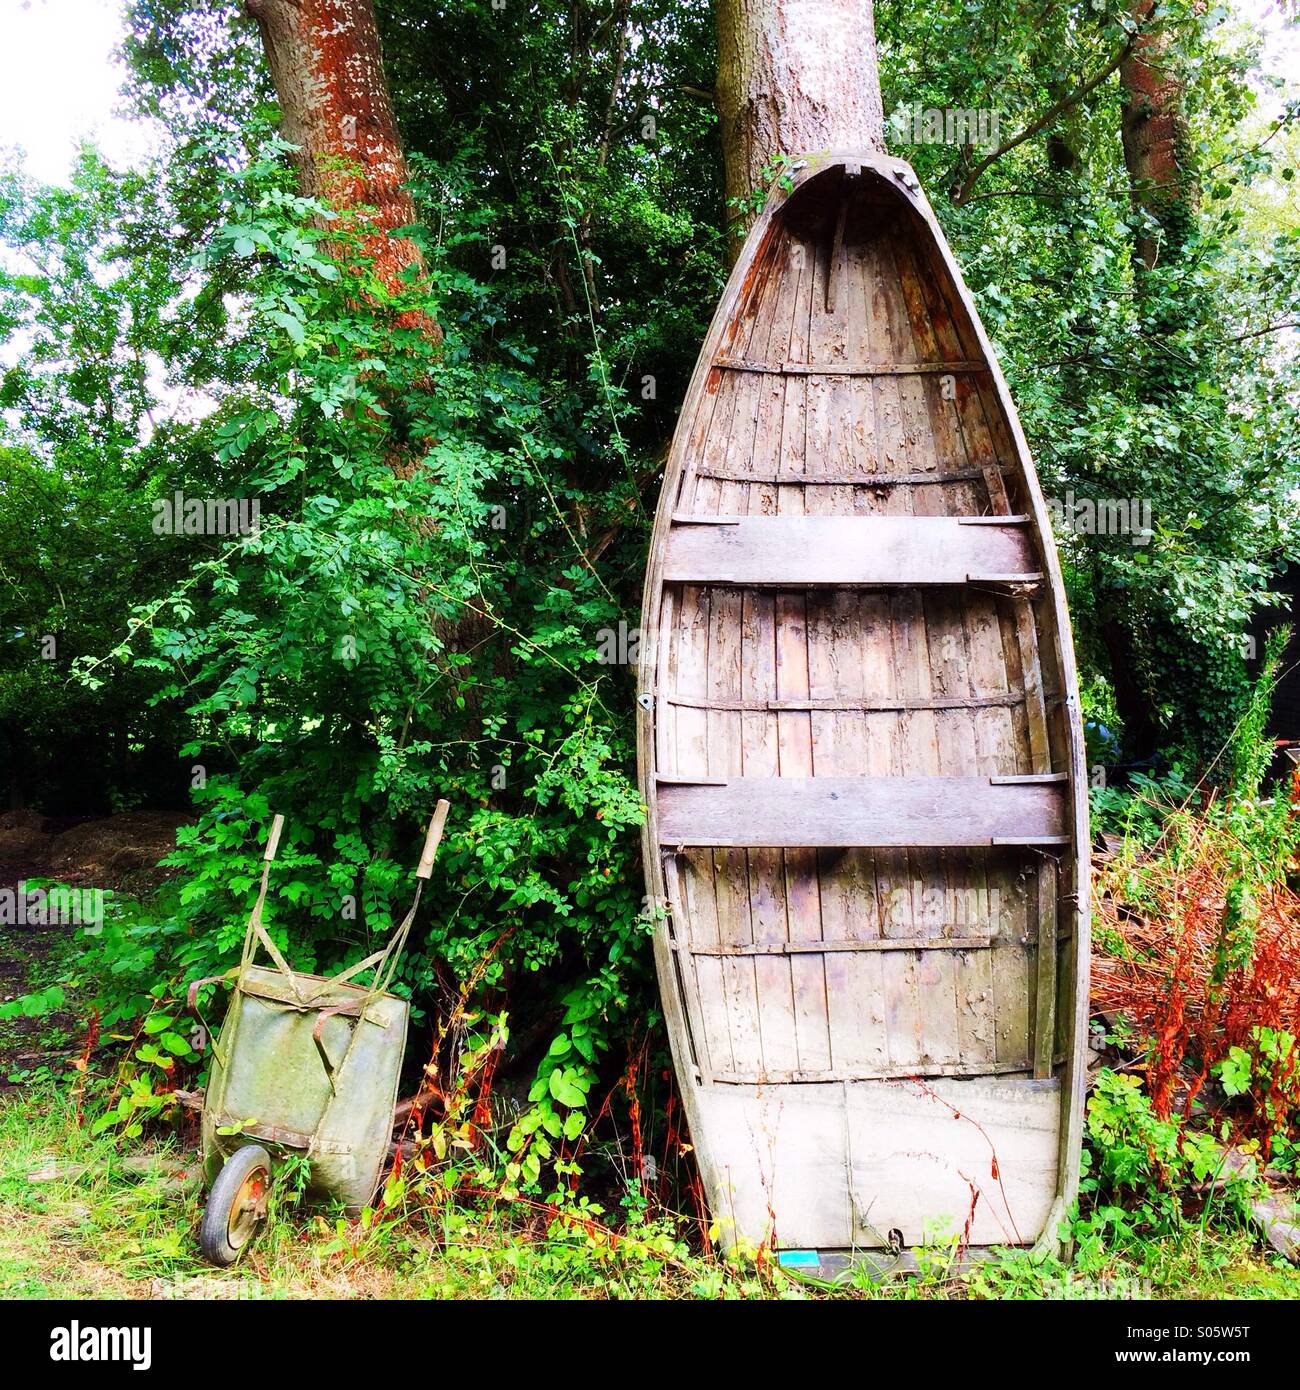 Old wooden boat and wheelbarrow in a garden Stock Photo